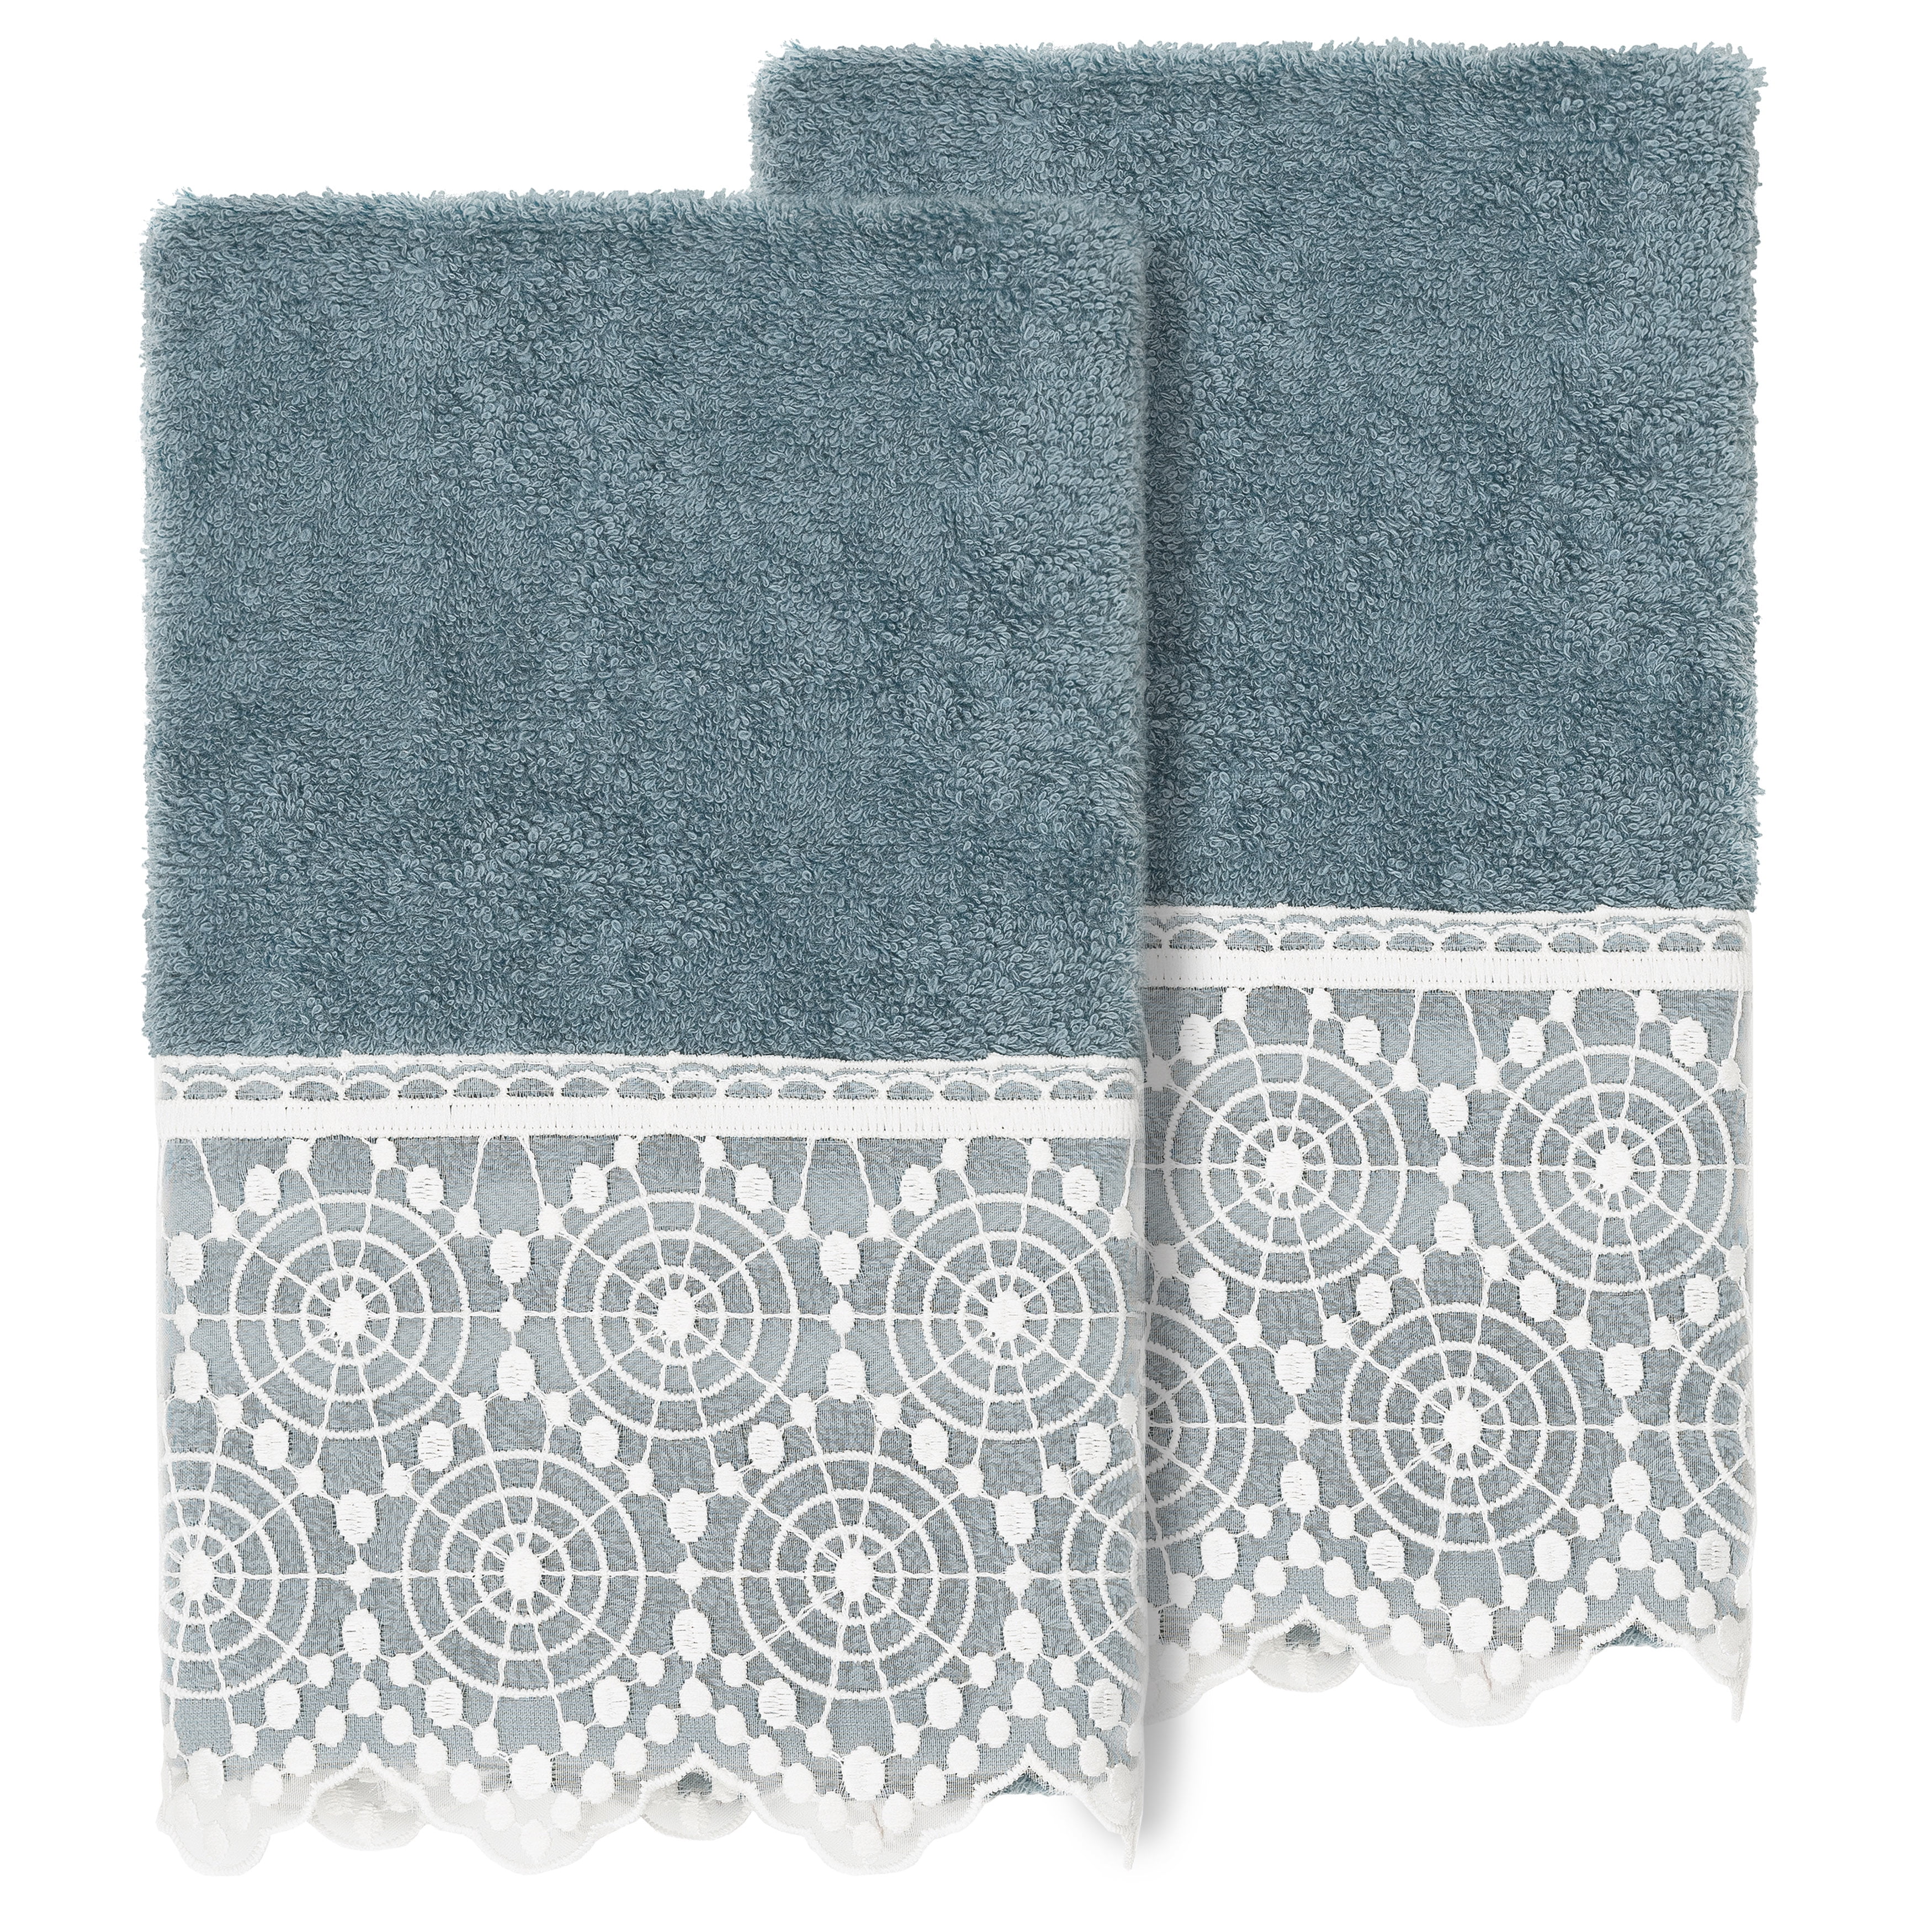 2pc Arian Cream Lace Embellished Hand Towels Light Gray - Linum Home  Textiles